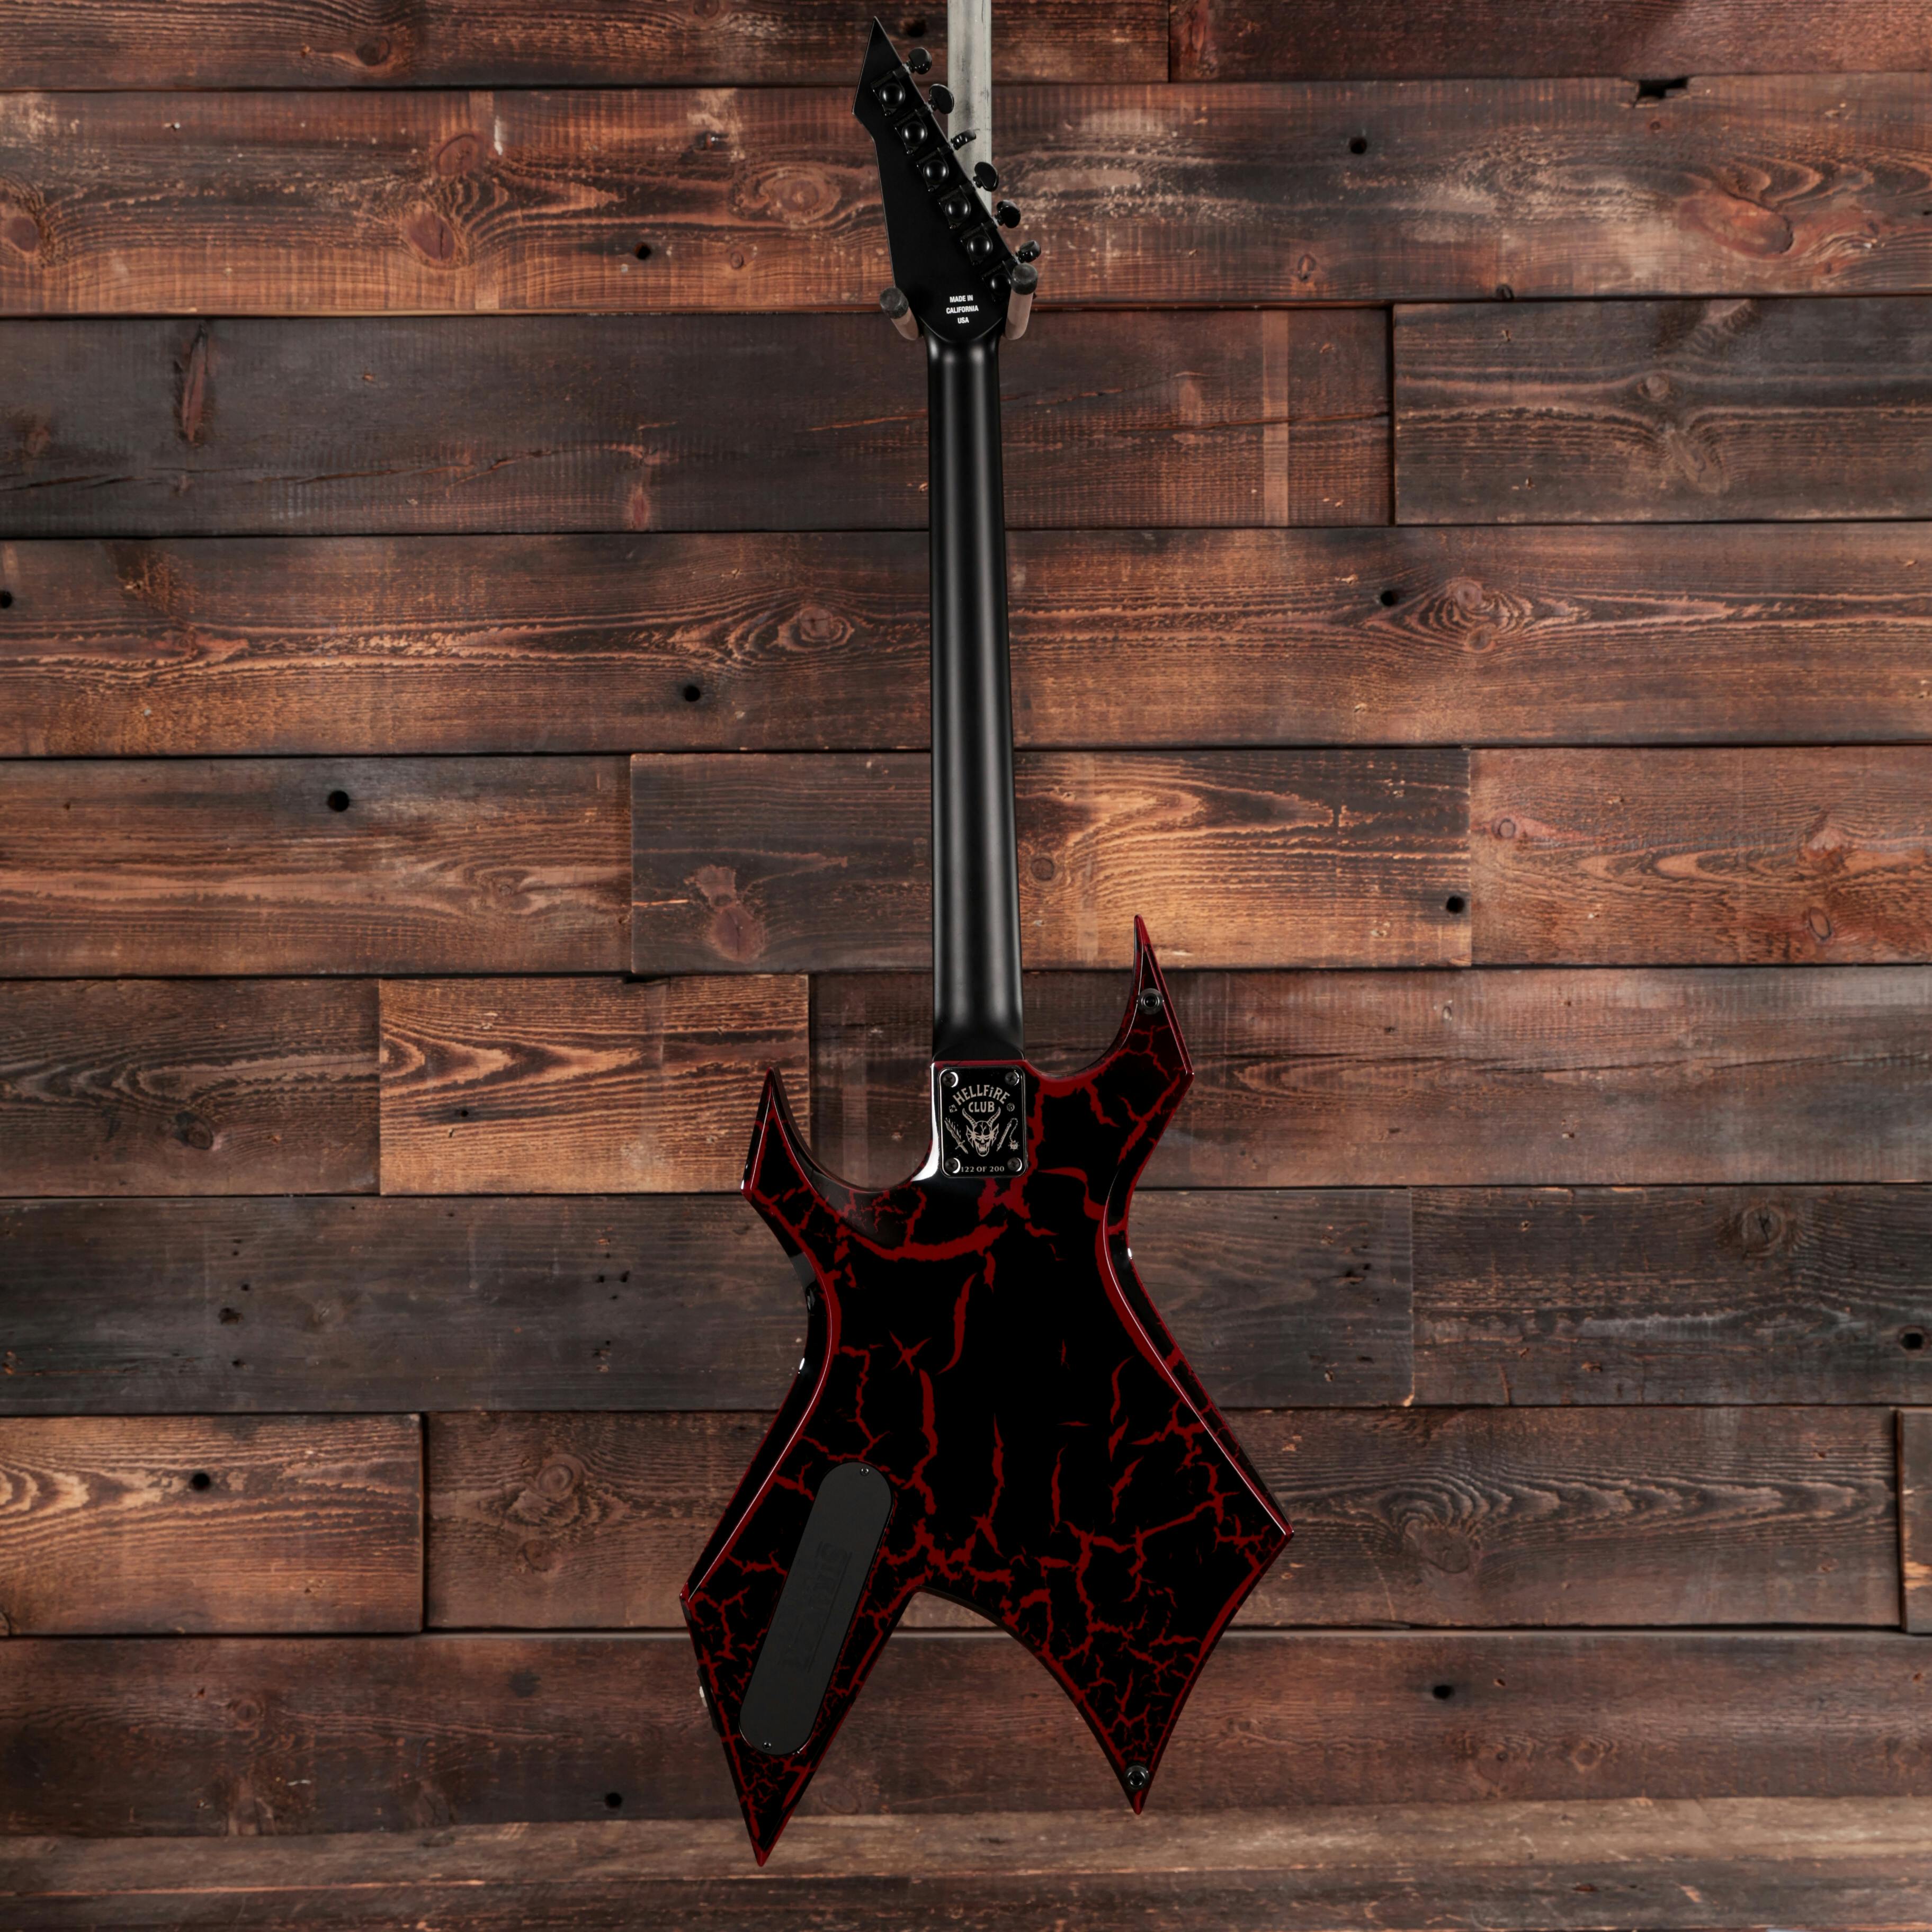 BC Rich celebrates season four of Netflix show Stranger Things with limited  edition Eddie's Warlock